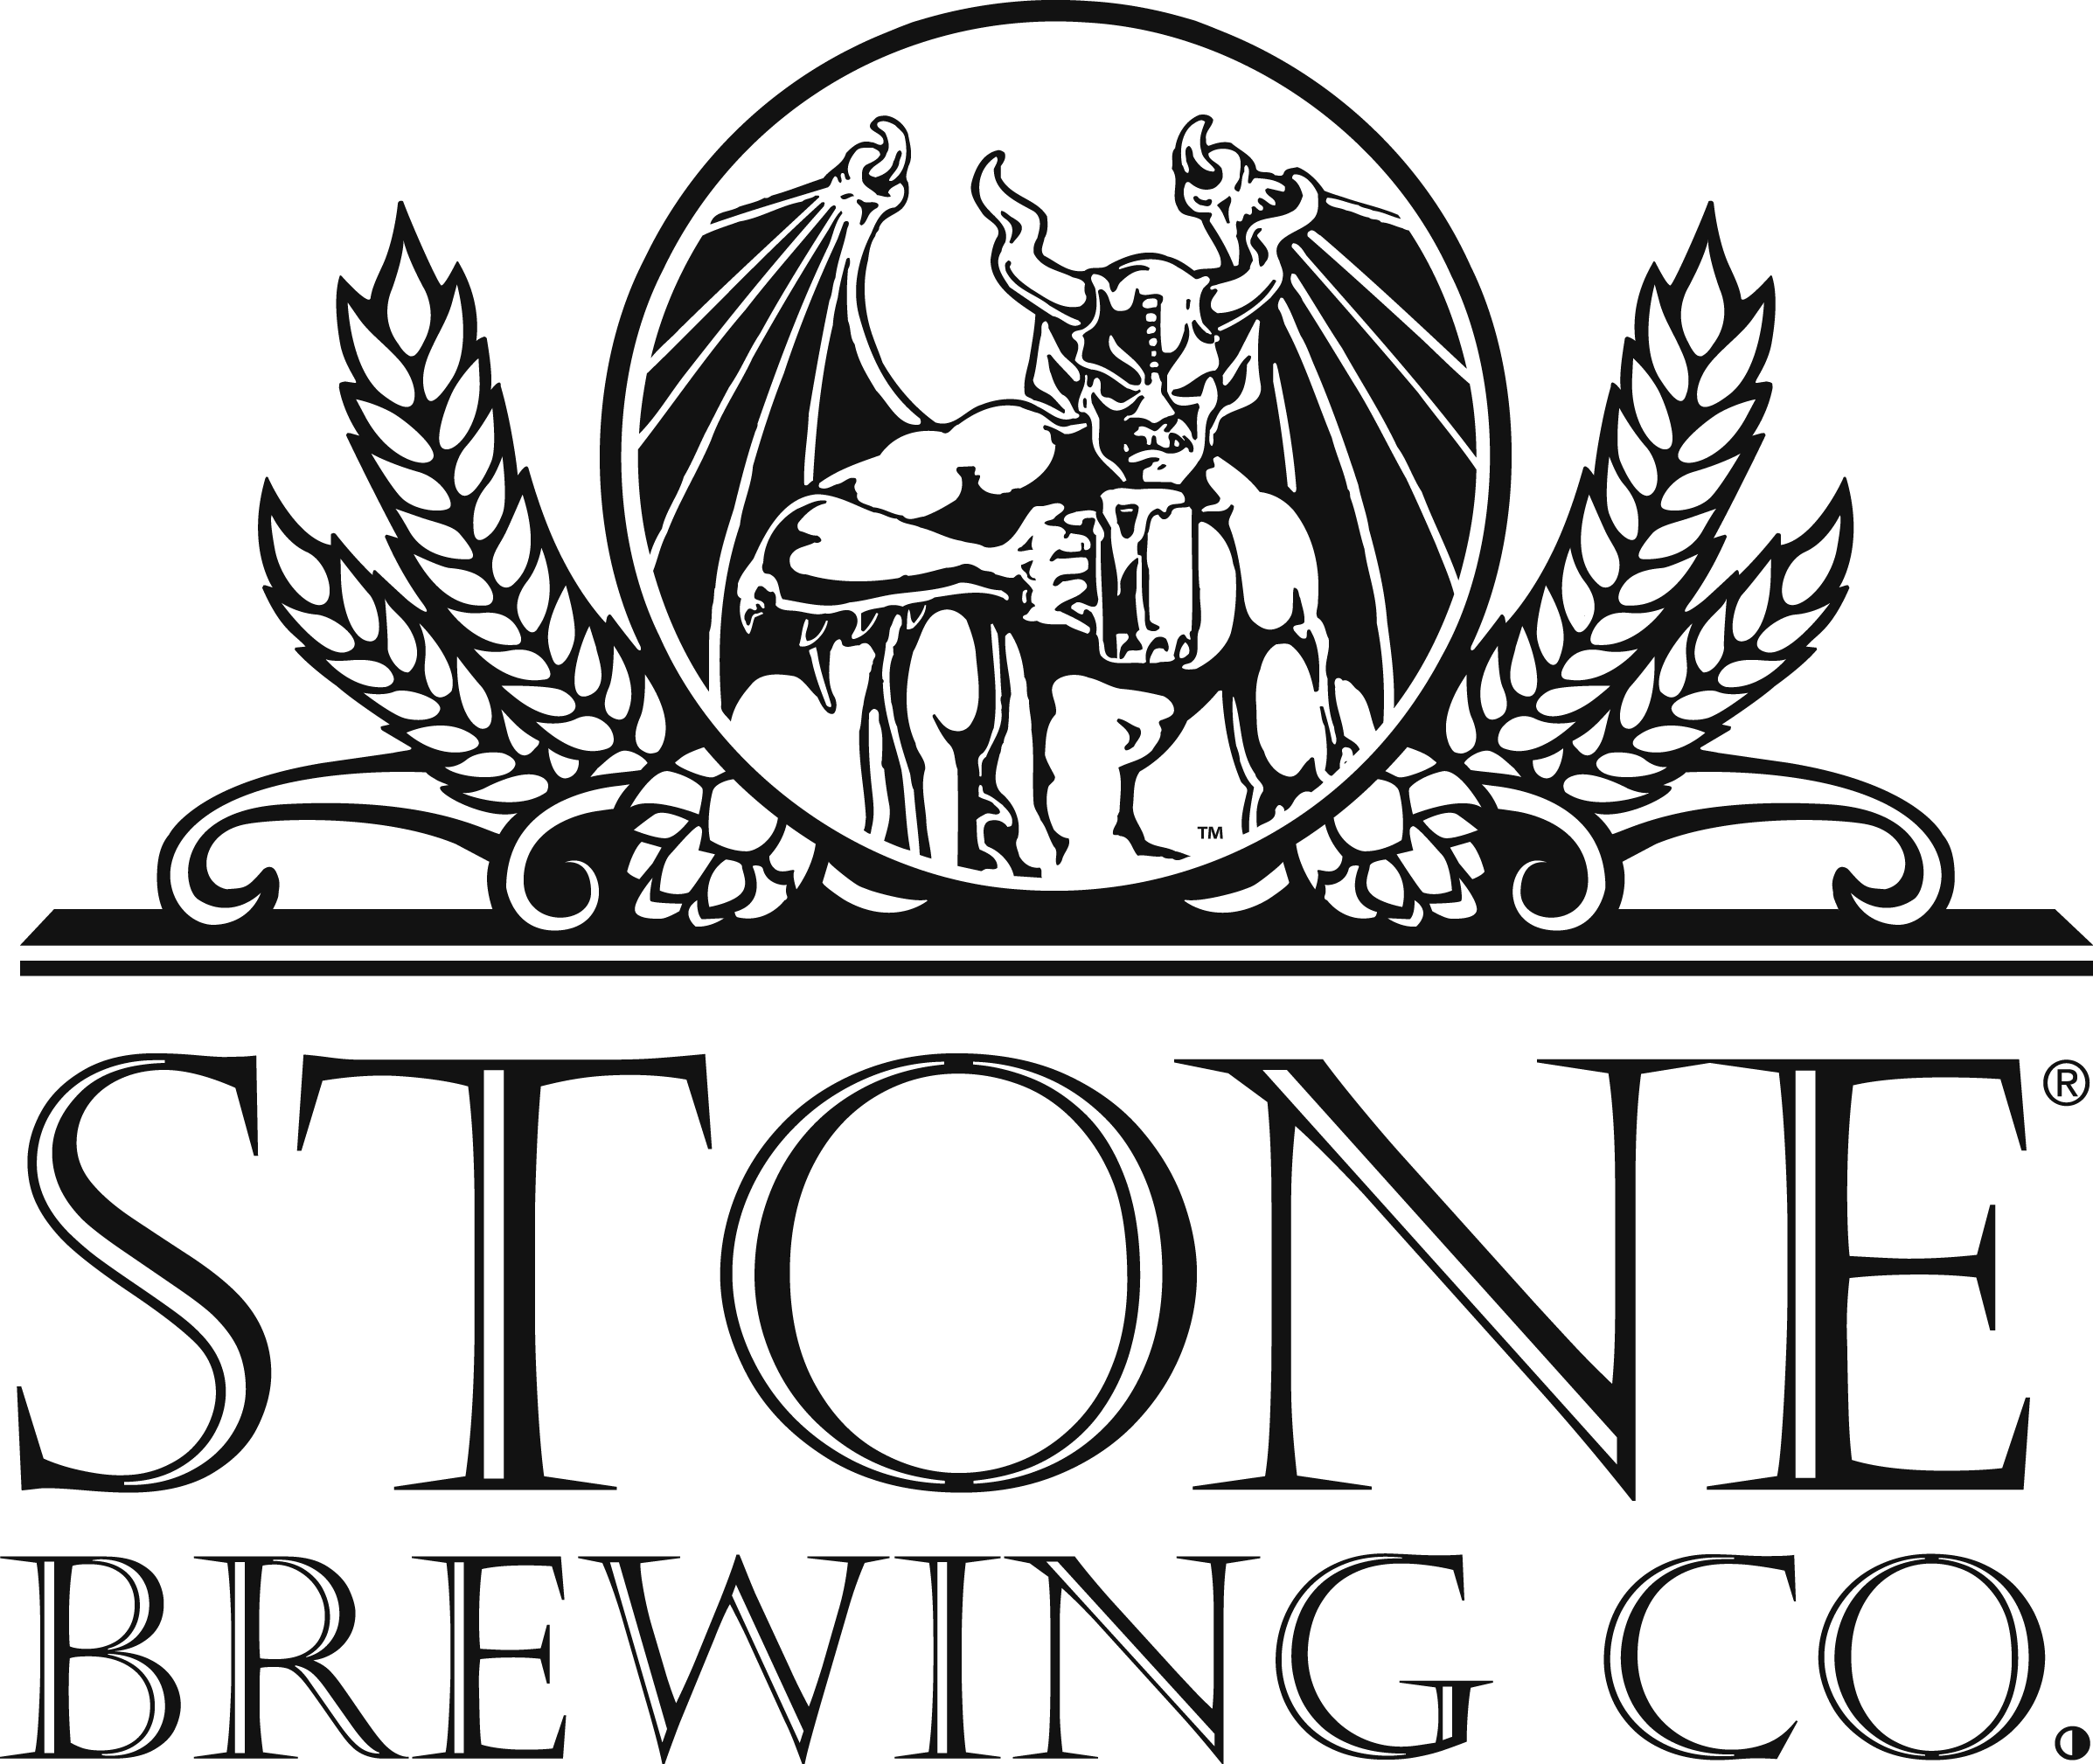 Stone Brewing Co. was founded in 1996 by Greg Koch and Steve Wagner in San Marcos, CA.